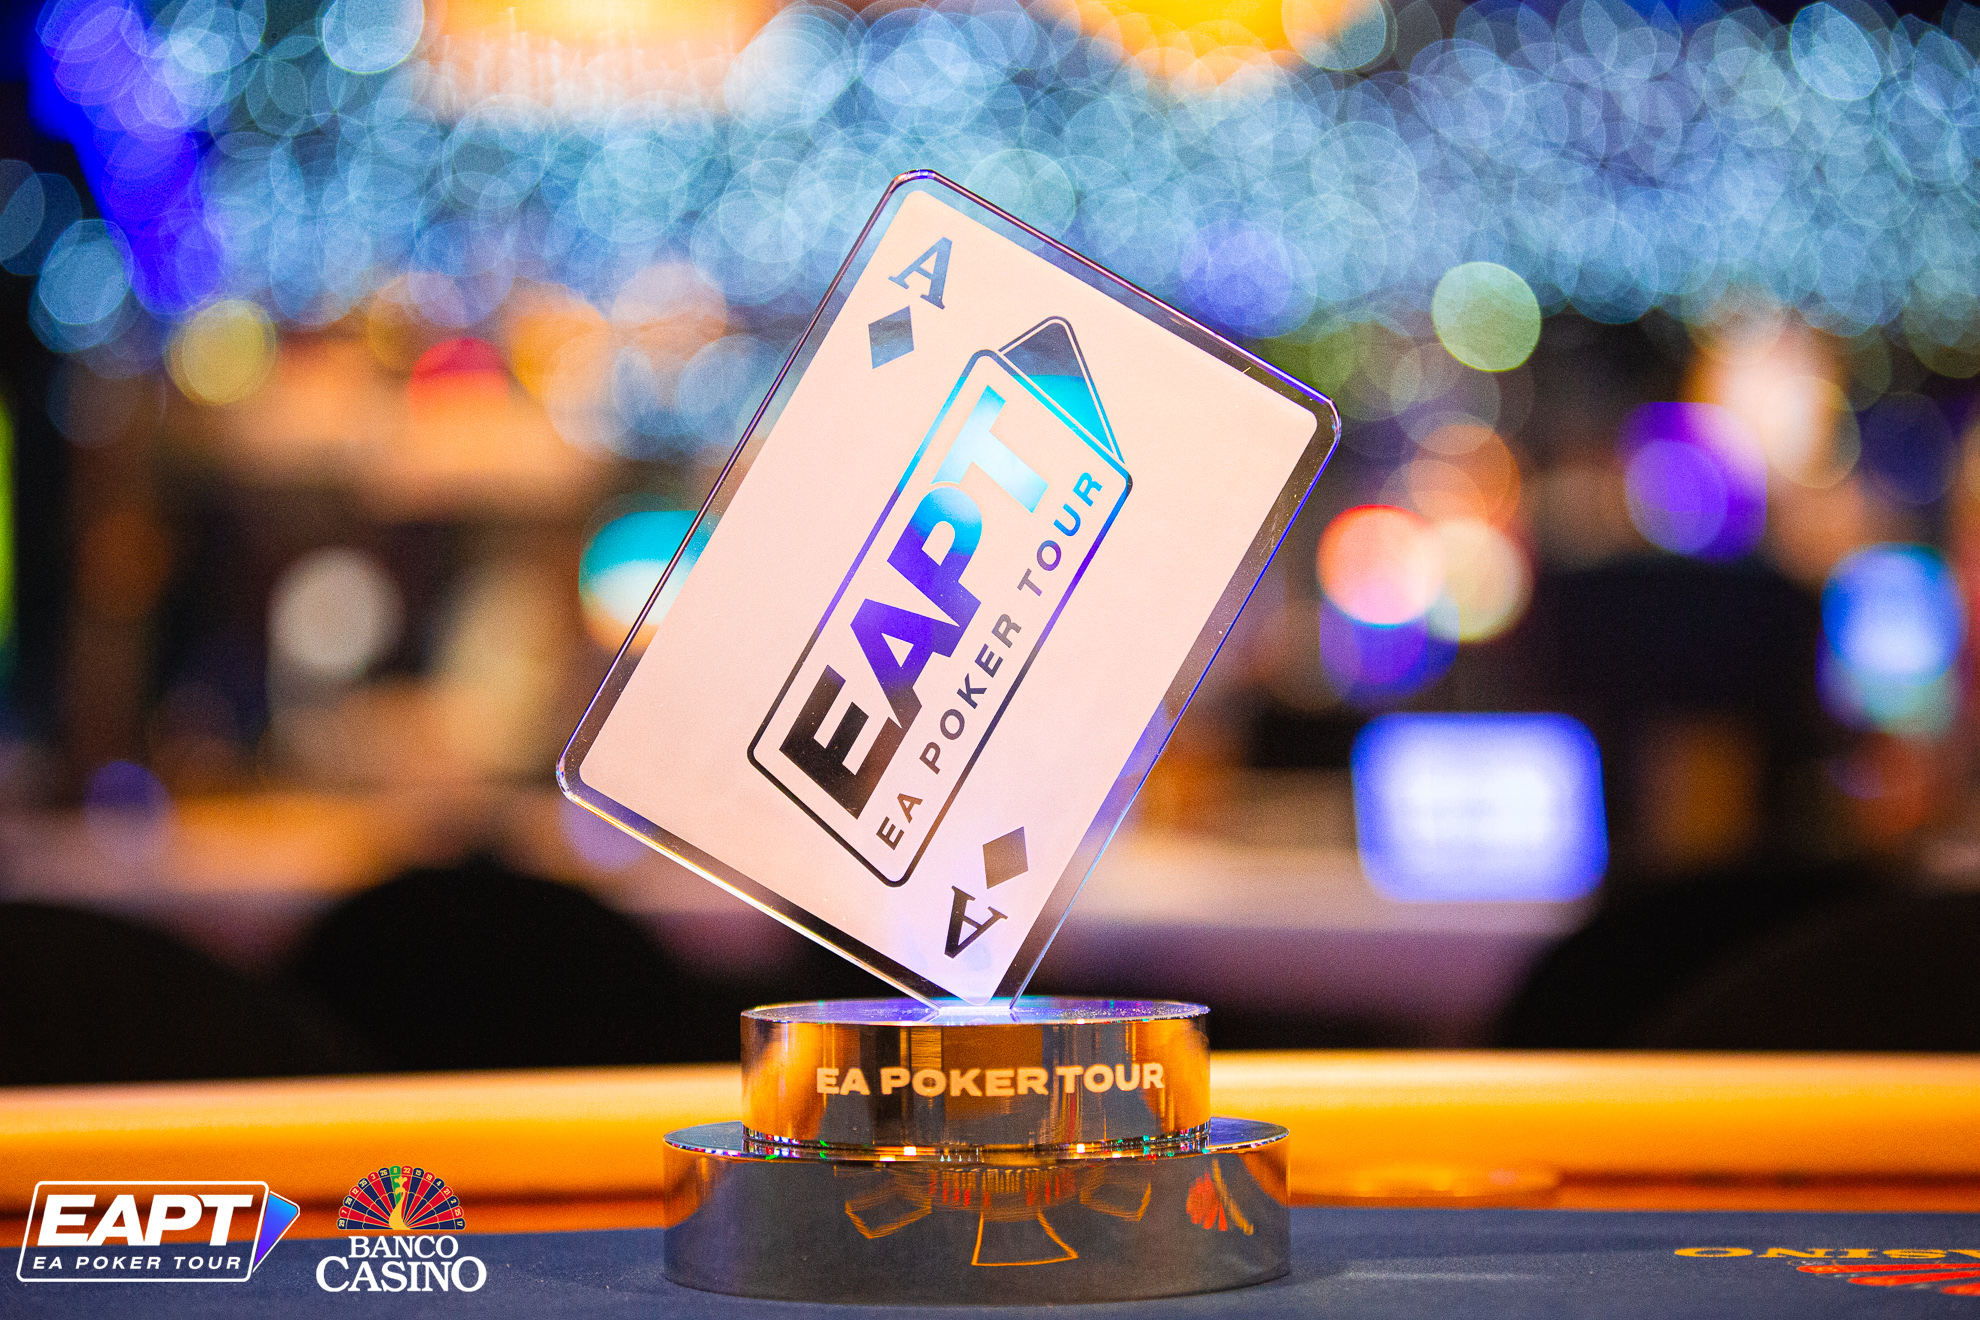 The EAPT Cup will recognize the champion today and the 200,000€ GTD Main Event will start tomorrow!